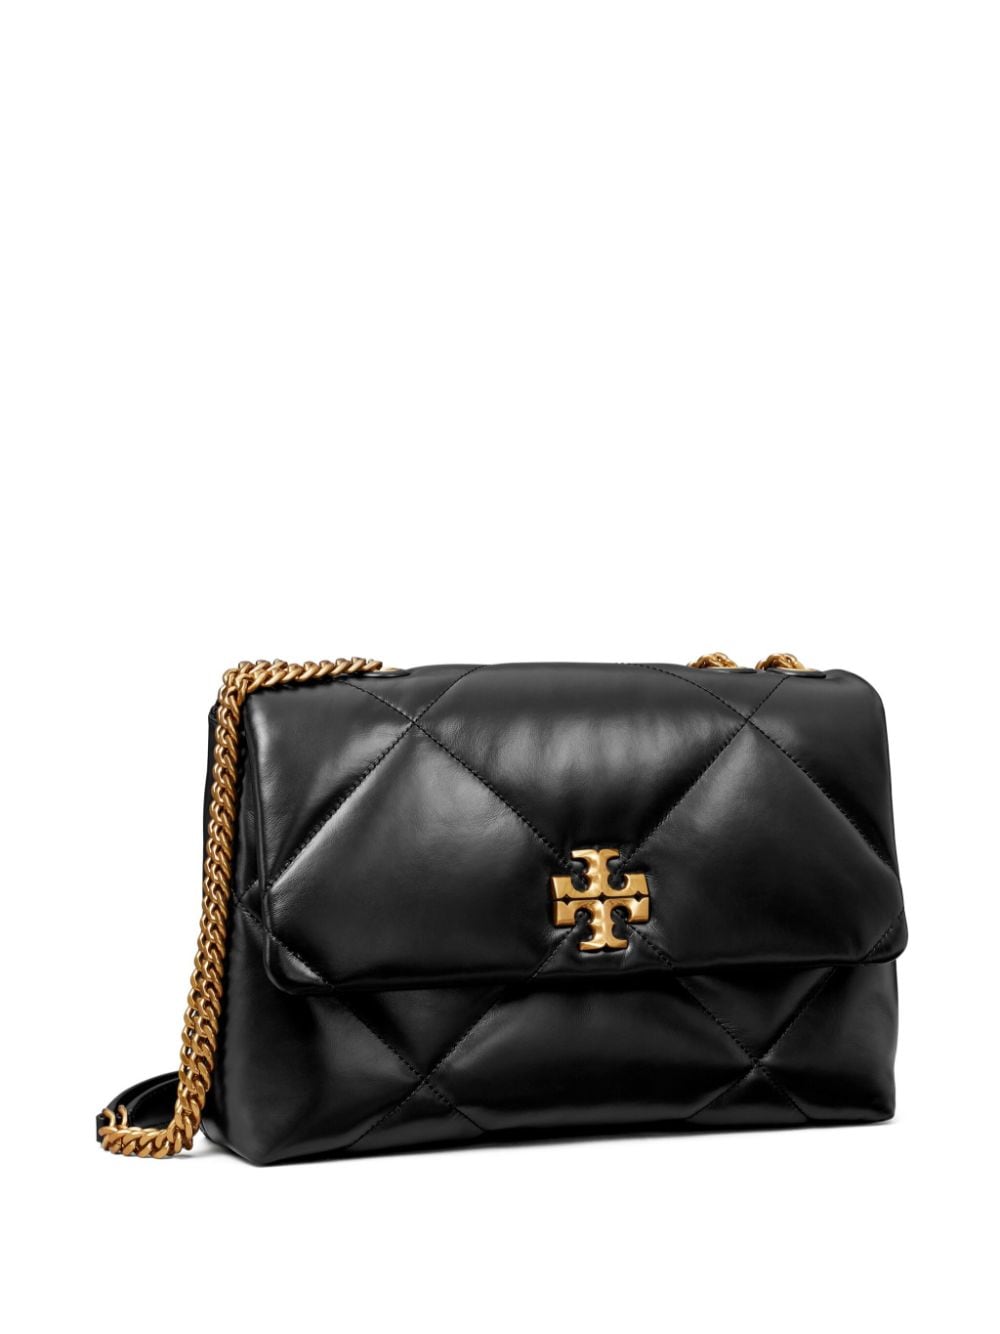 TORY BURCH Stylish Black Quilted Leather Shoulder Handbag for Women - Carry All Your Essentials in Style!